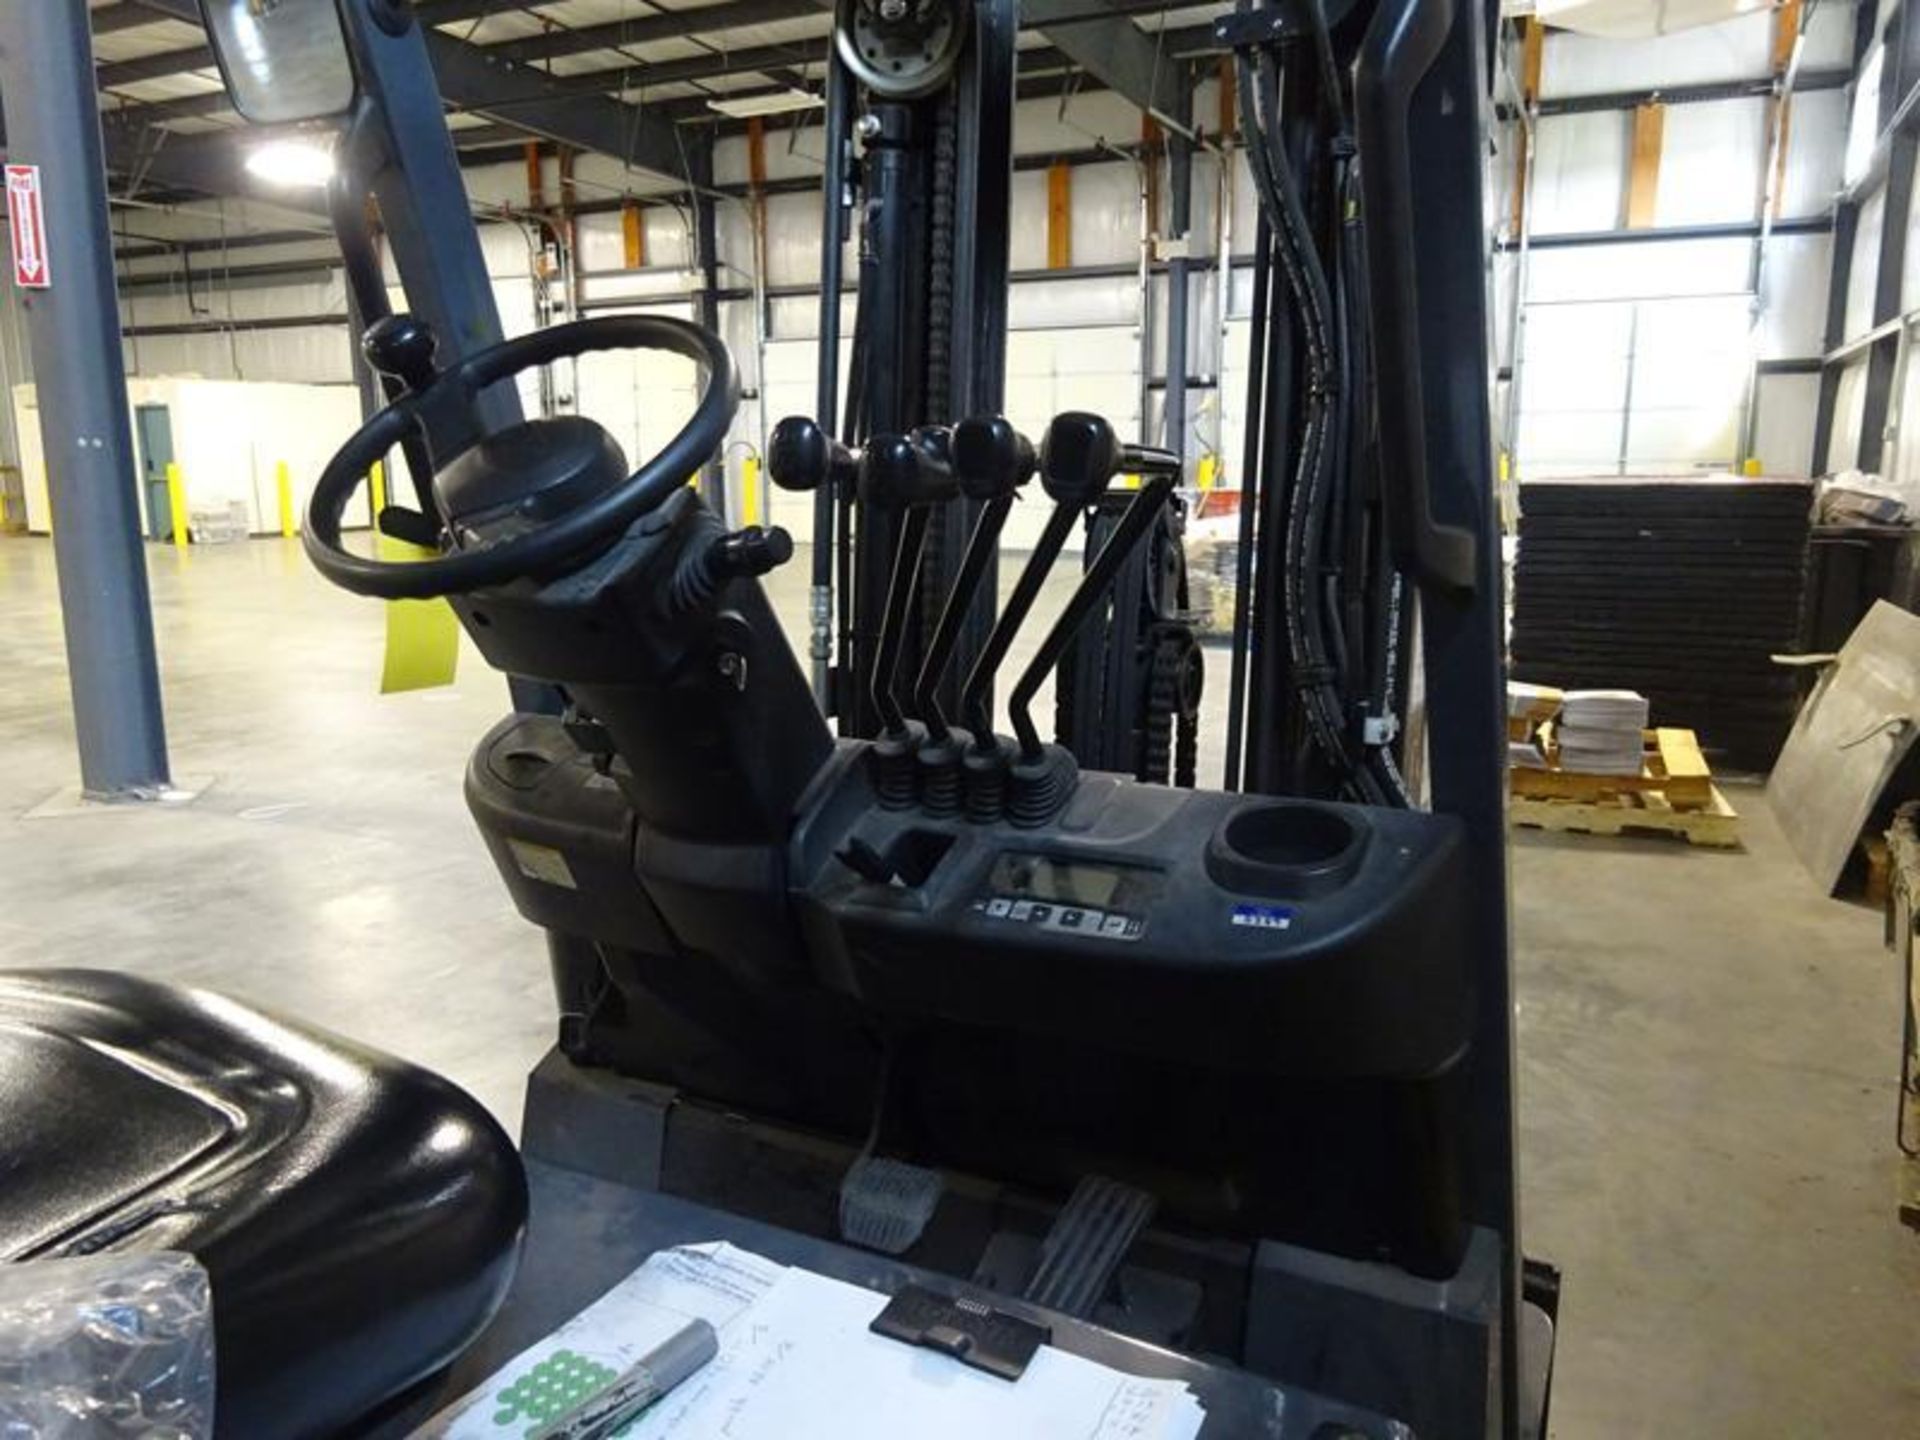 Toyota RF BCU 25 Electric 5000 Lb. Forklift, S/N 62789, 8021 Hours, W/ Side Shift, Roll Clamp Accept - Image 2 of 5